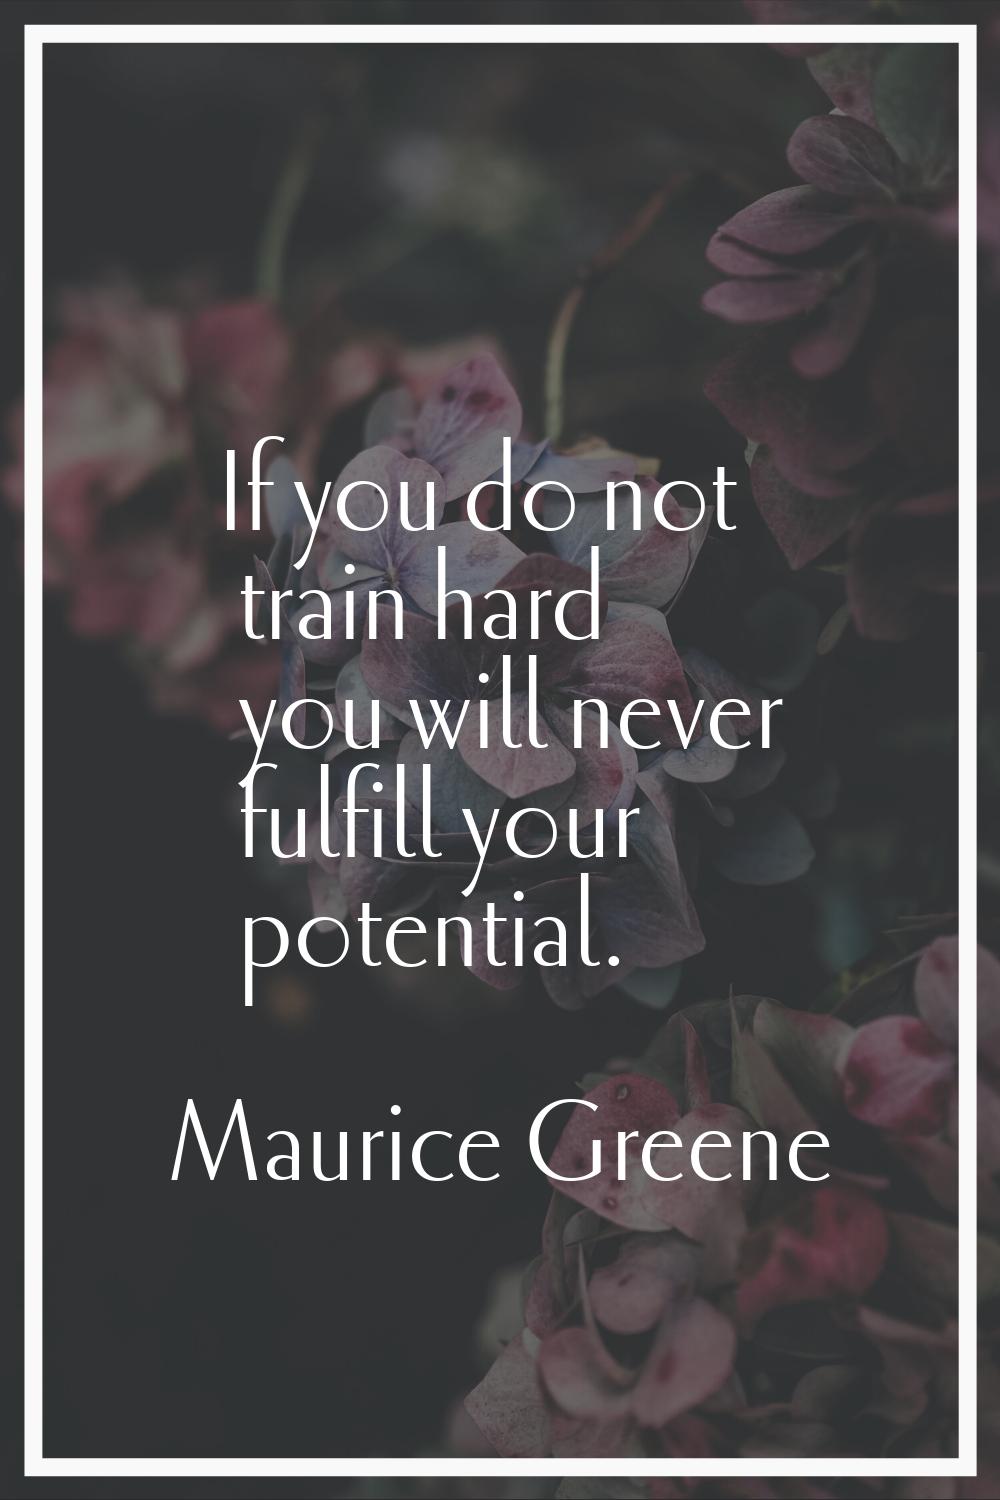 If you do not train hard you will never fulfill your potential.